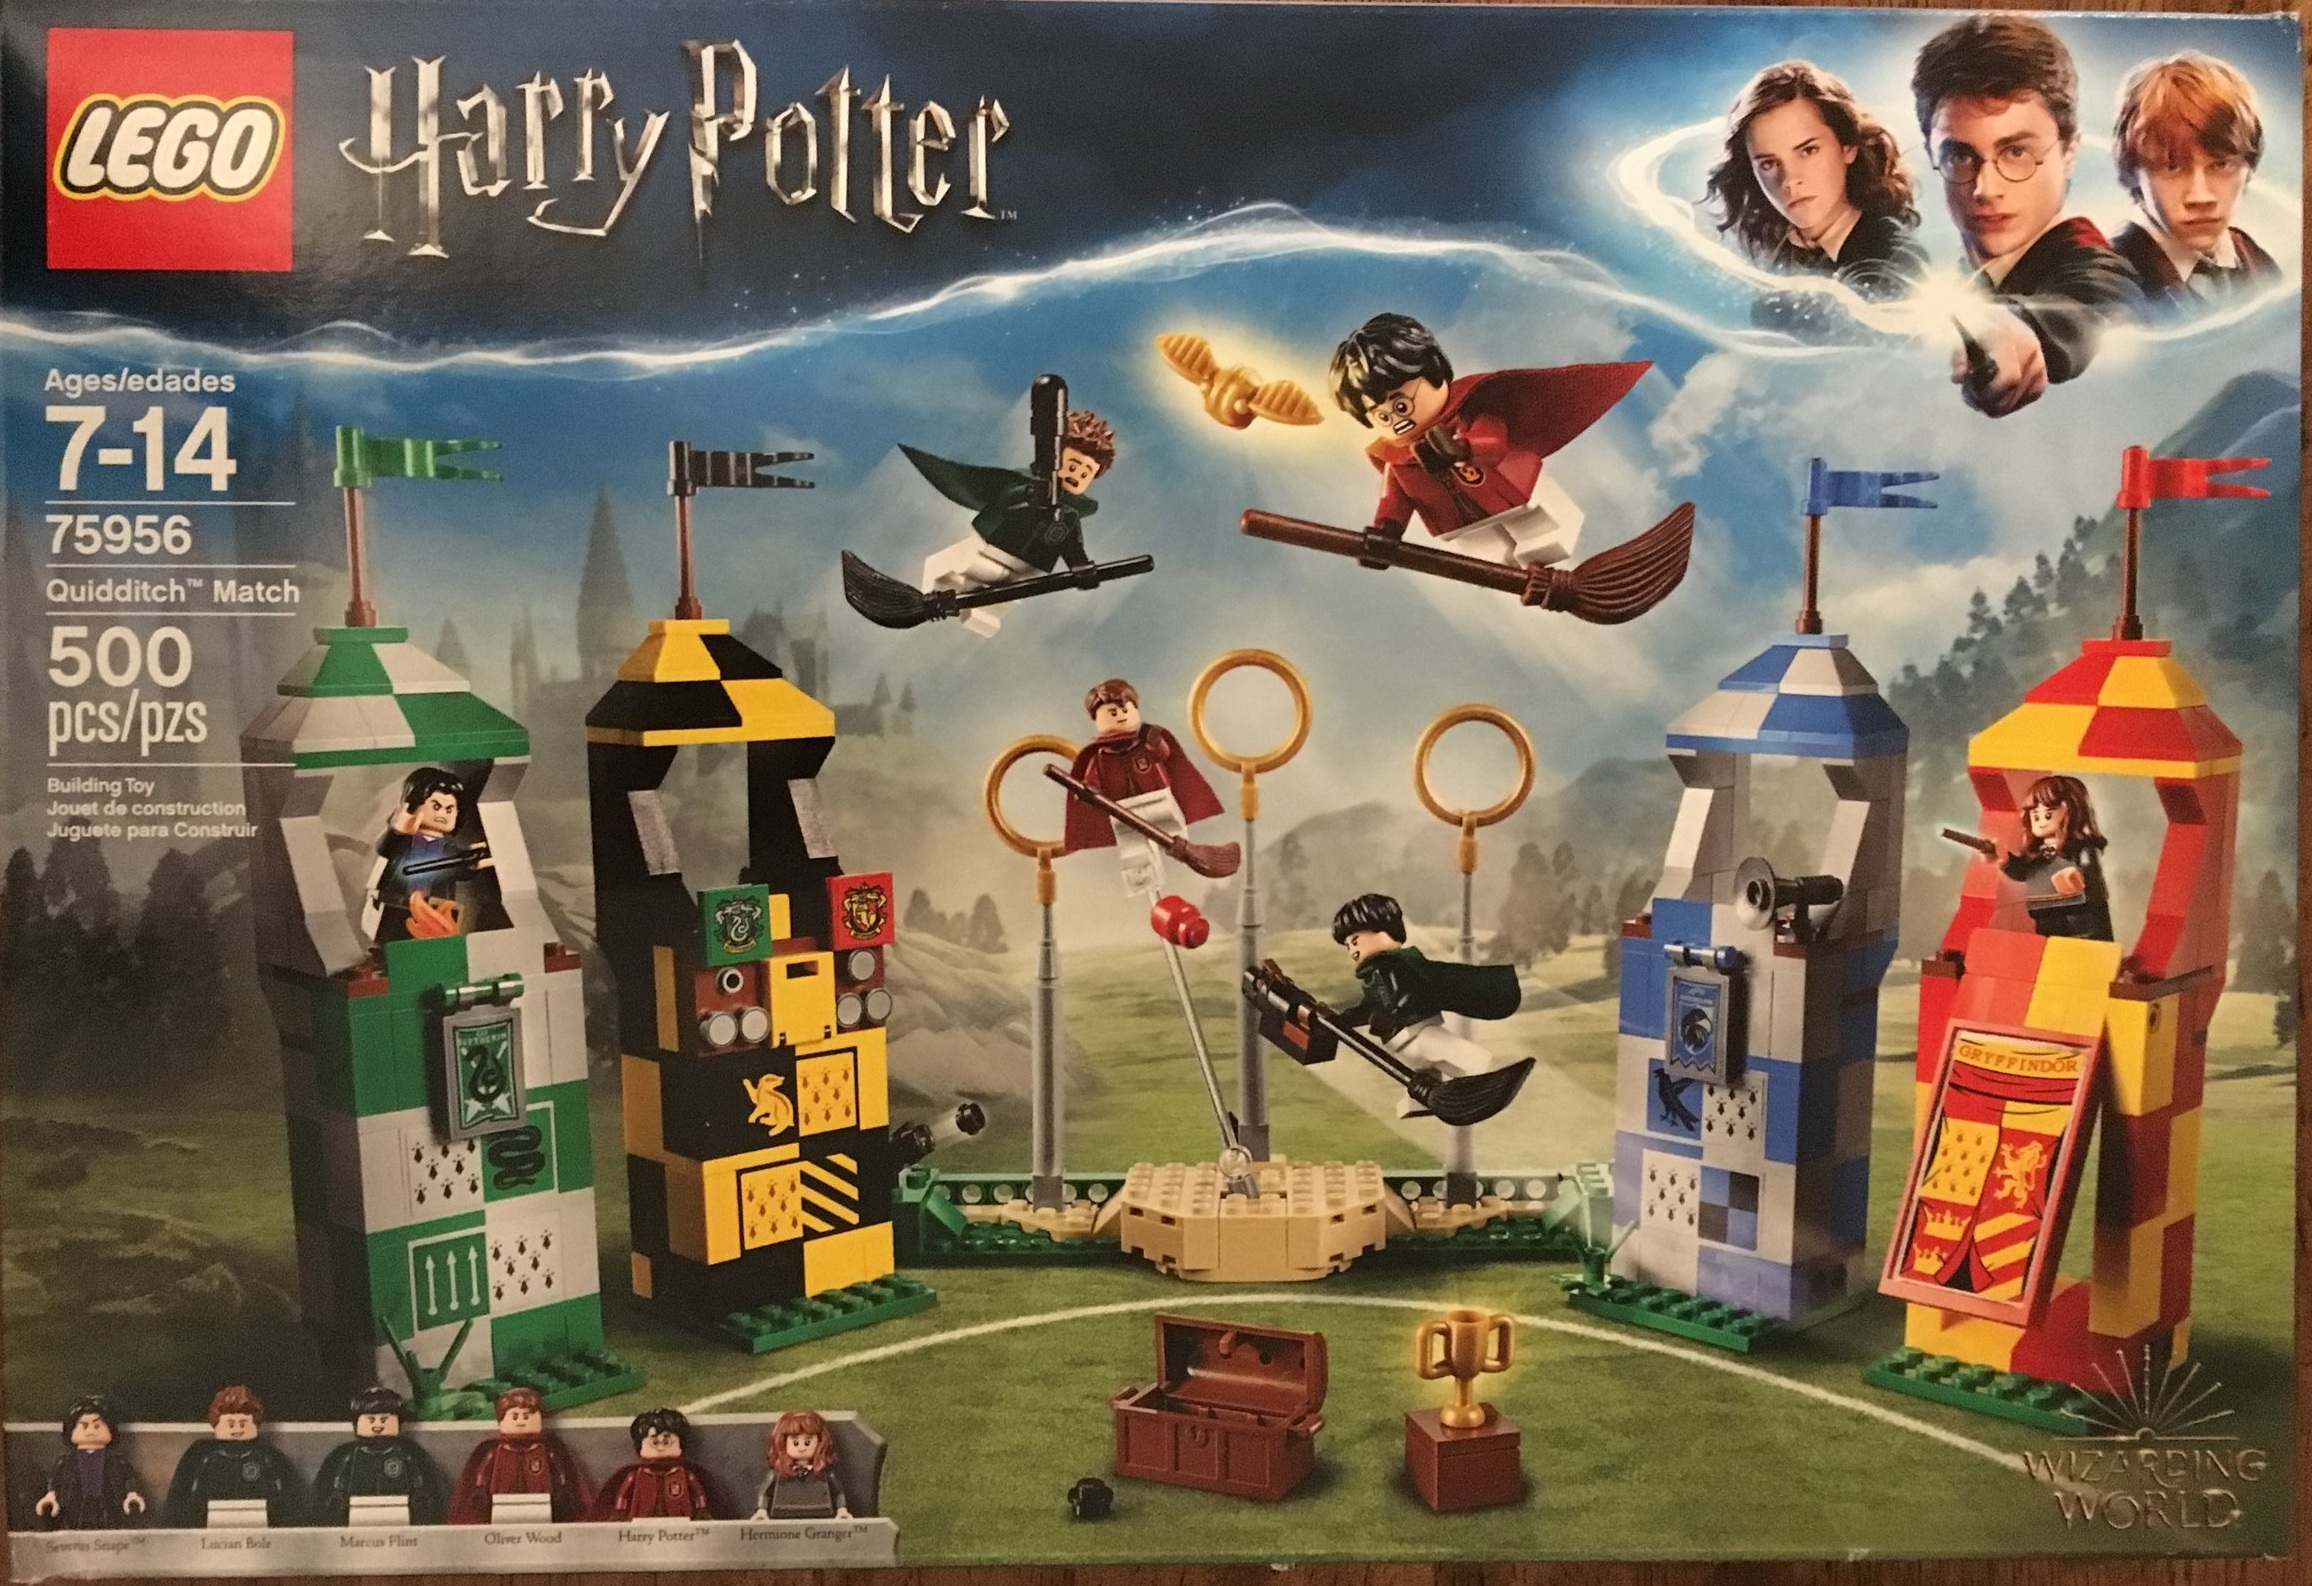 It's Time for a New Harry Potter Quidditch Game